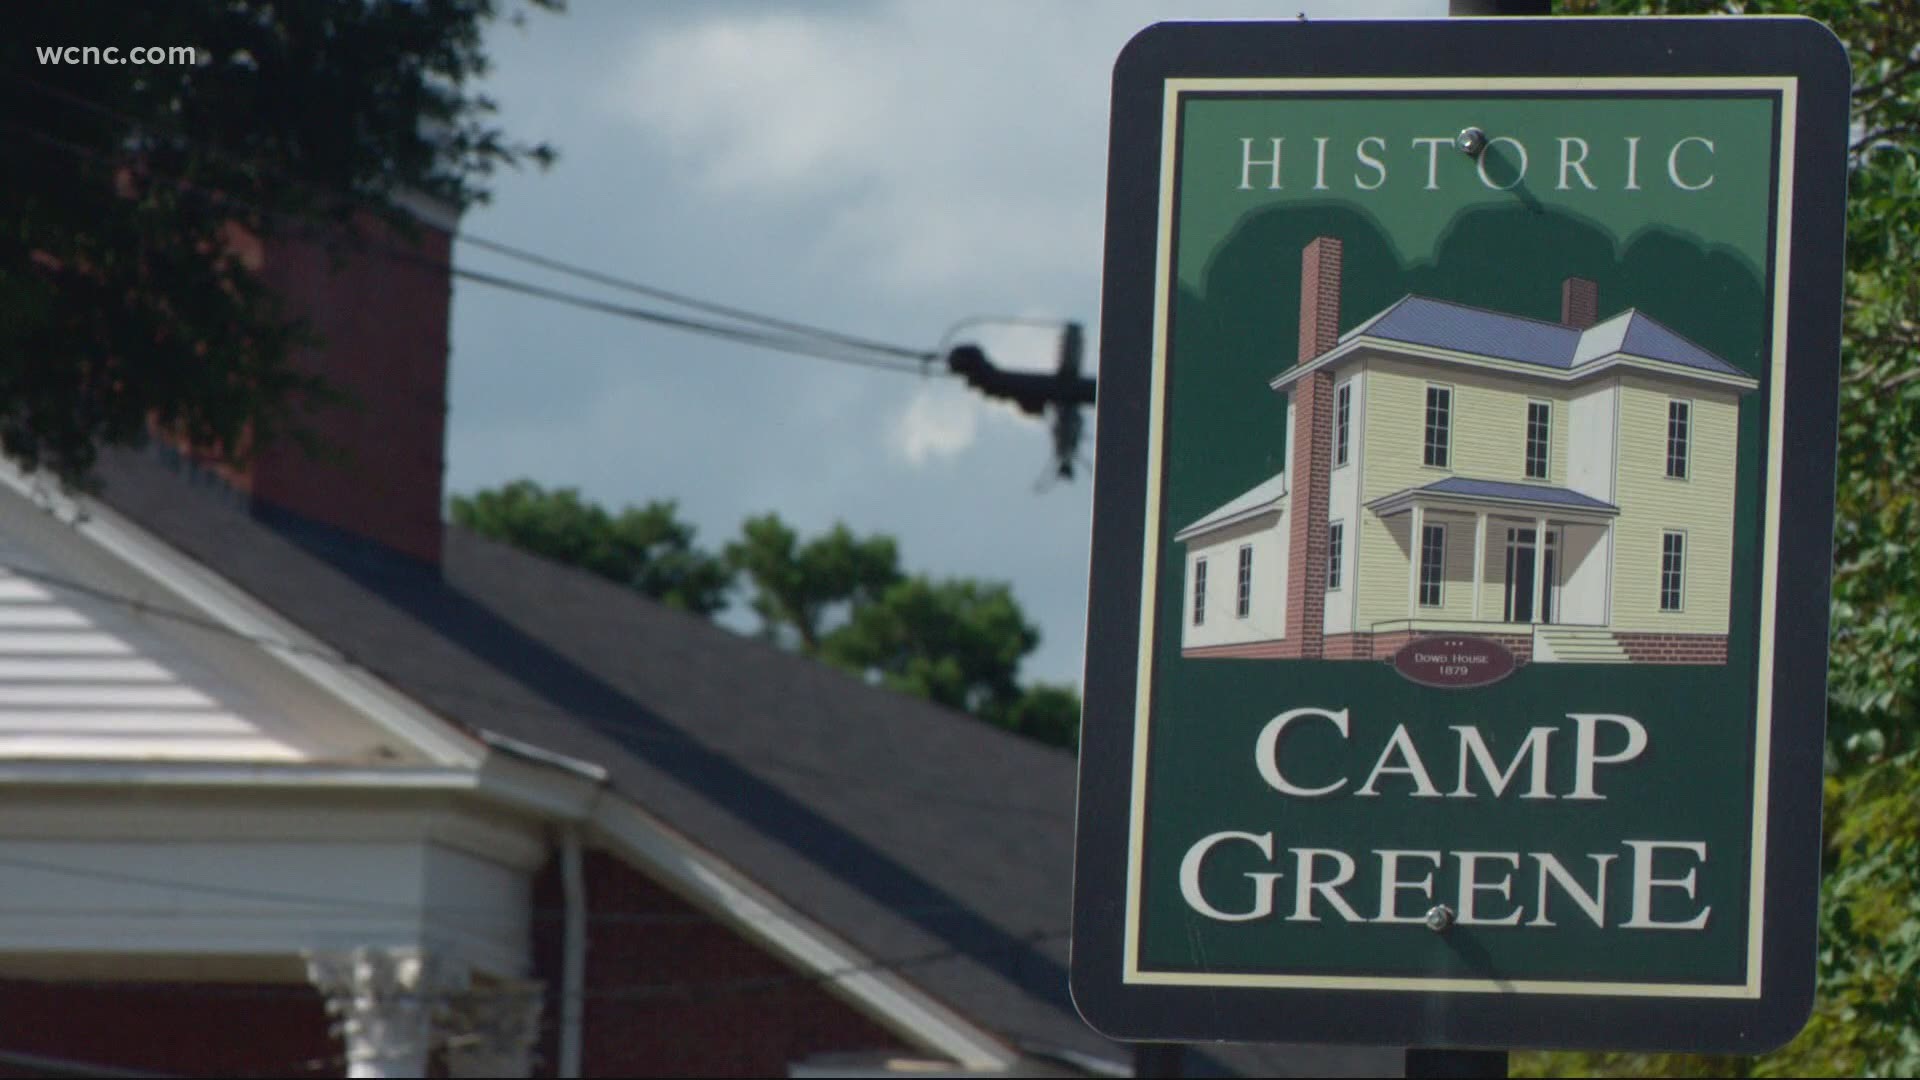 Later this week Camp Greene neighbors say they plan to meet and involve community officers to come up with strategies and ideas to help cut down gun violence.